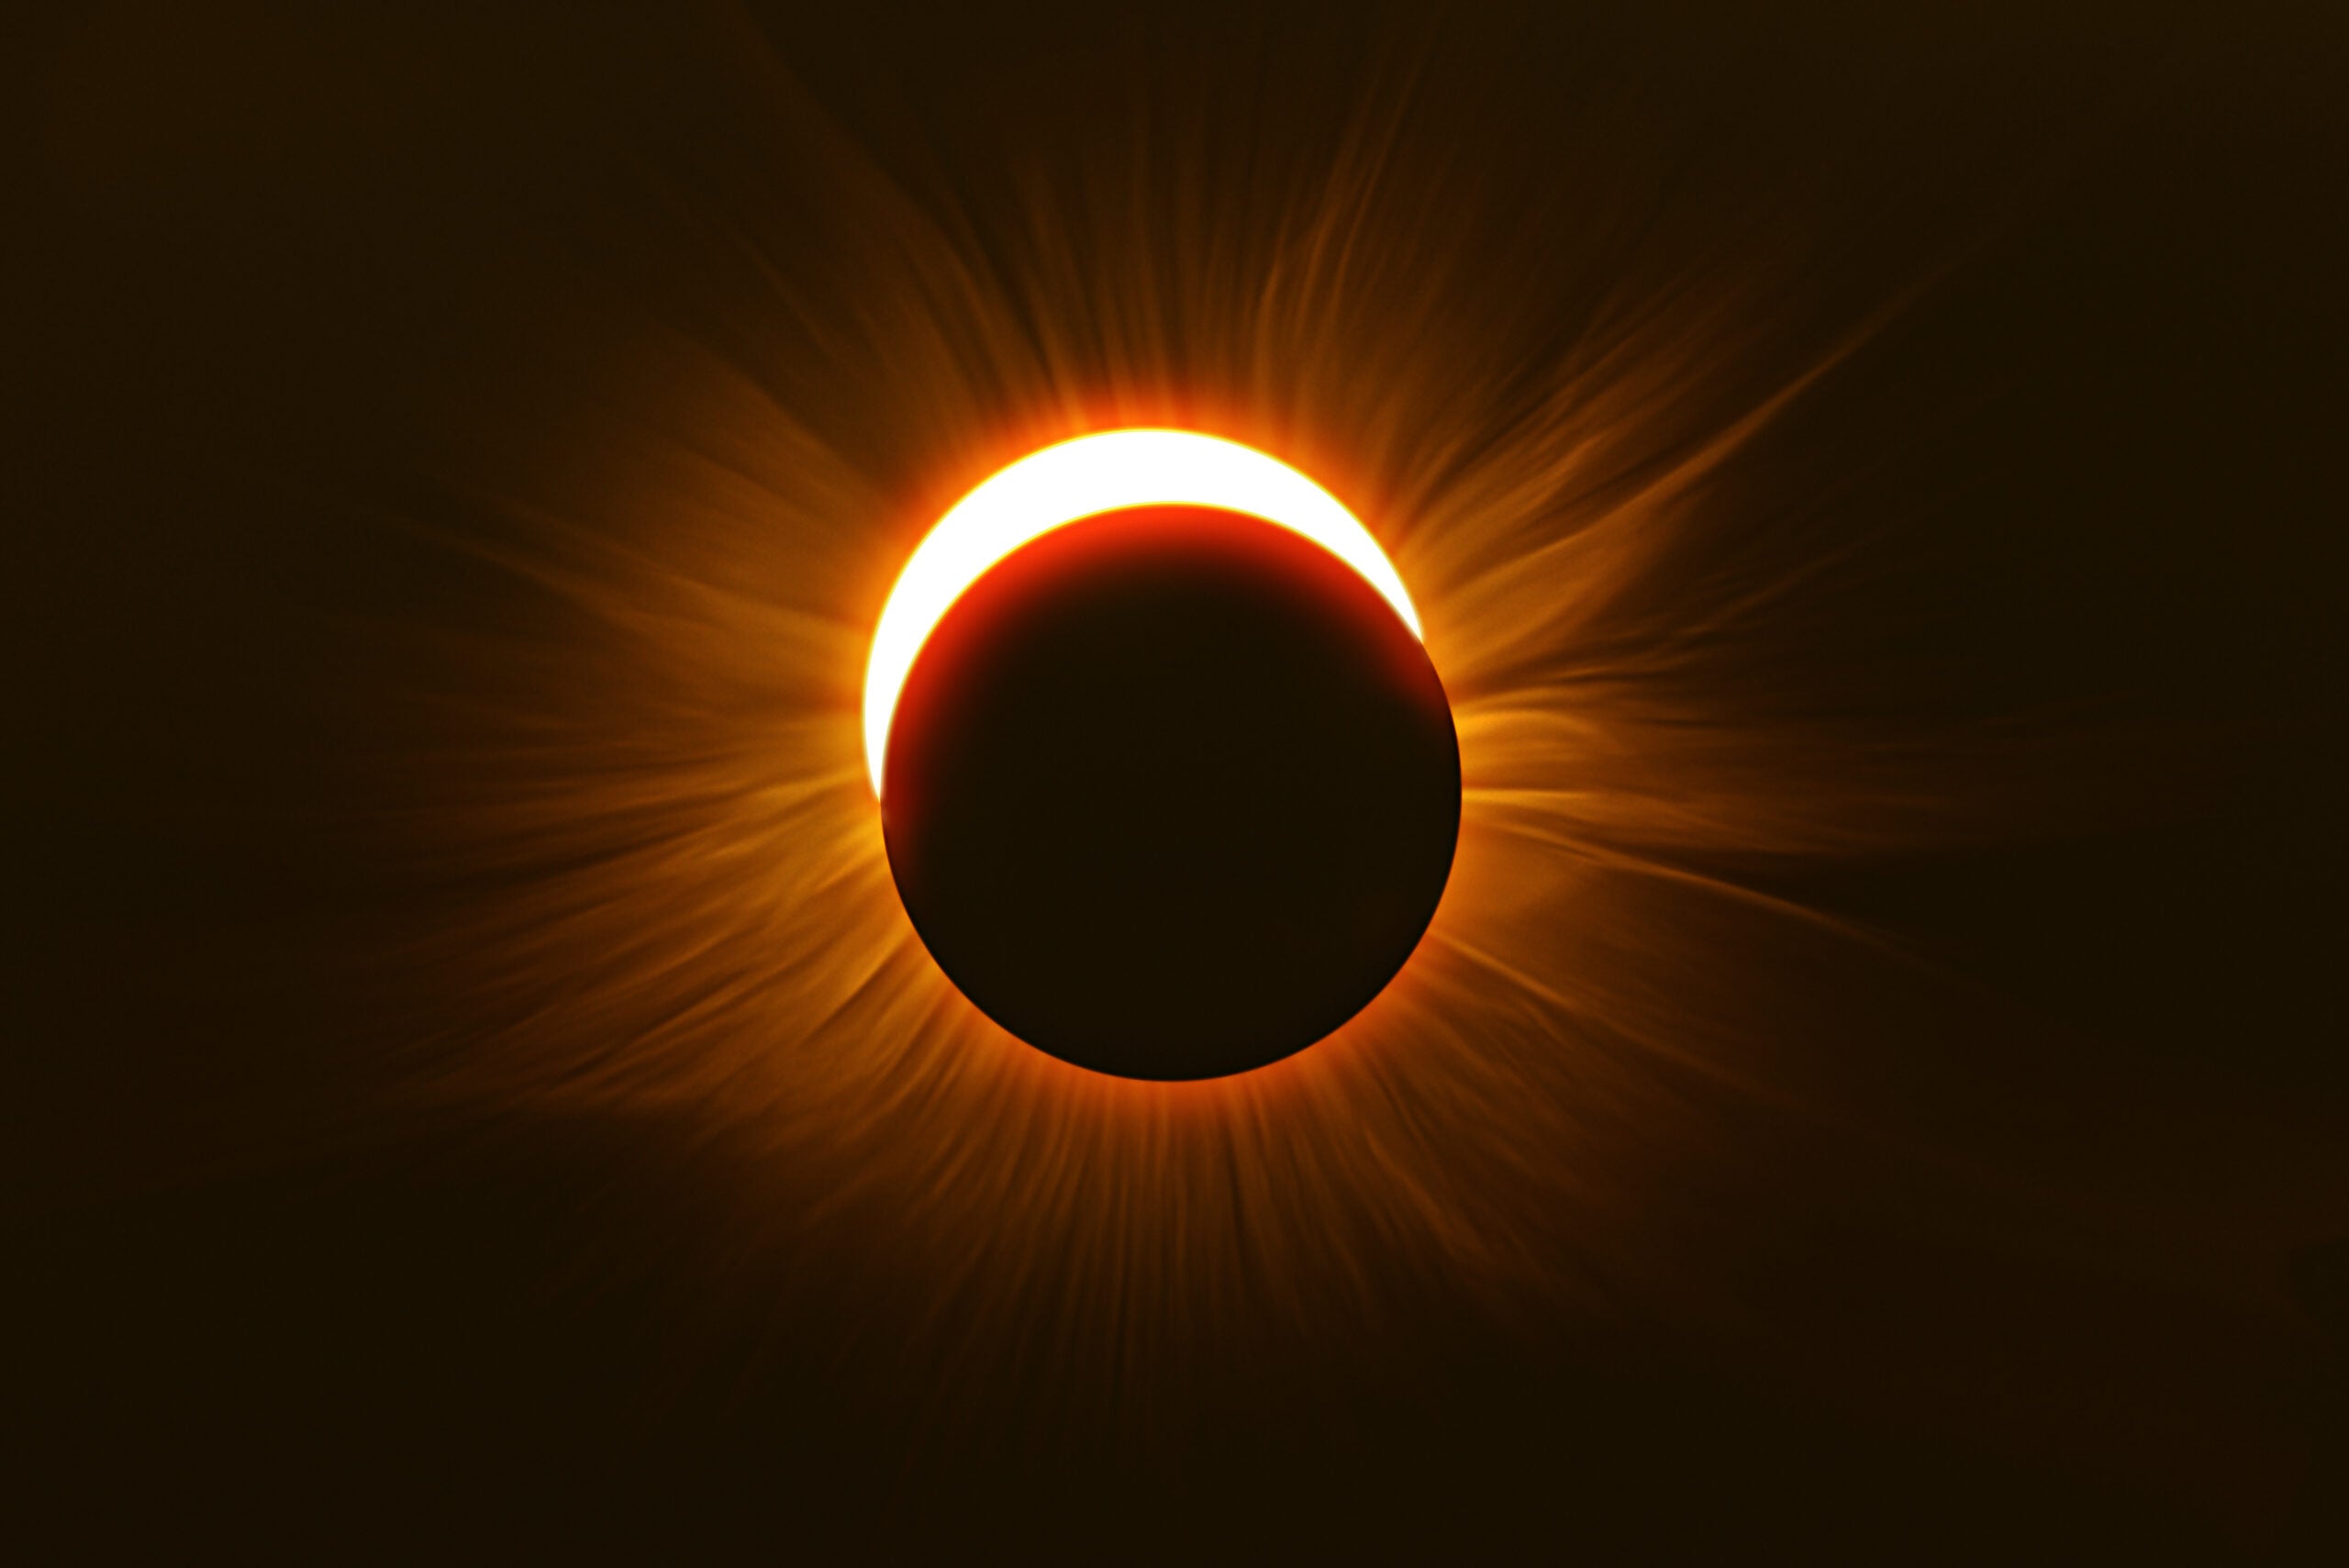 It is not too late: Final-minute suggestions for experiencing the eclipse